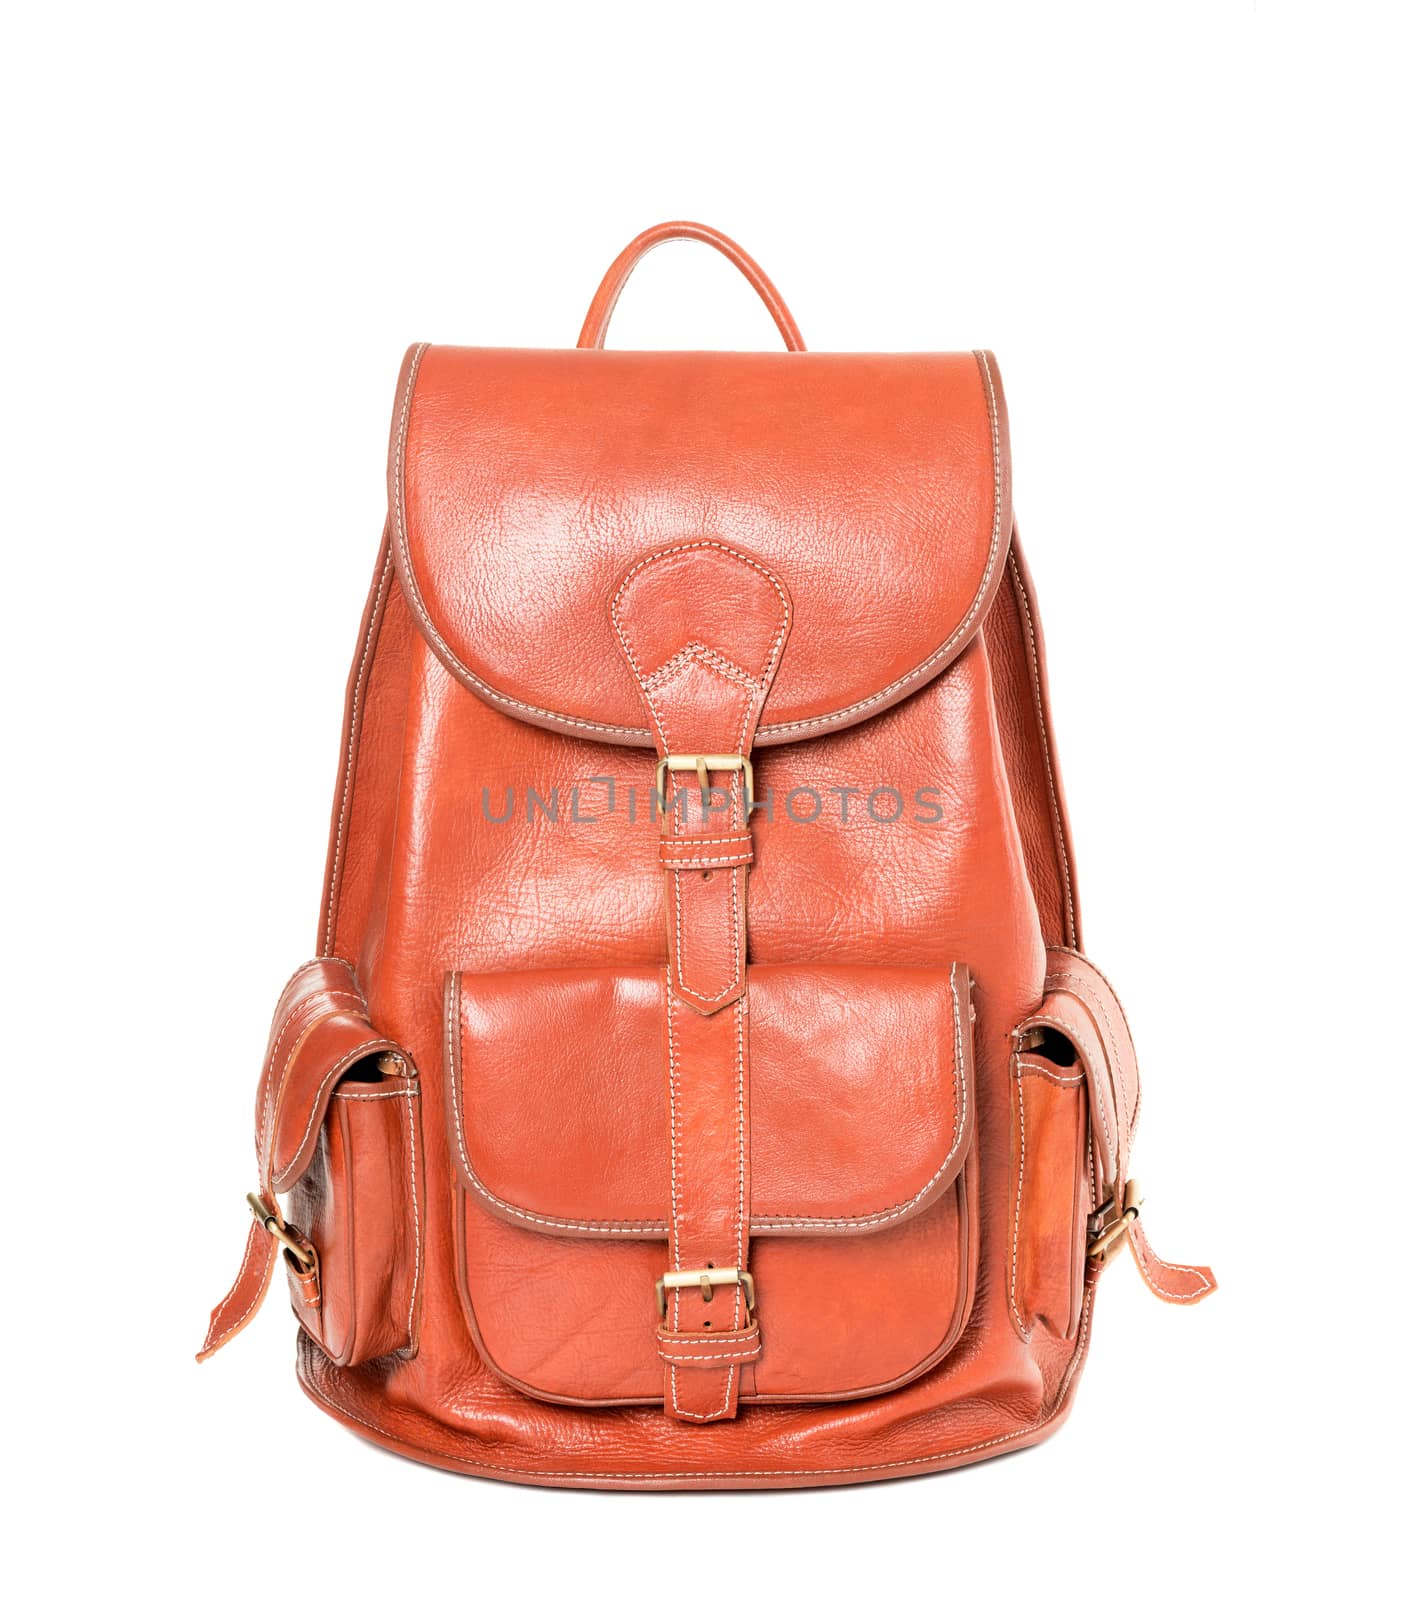 Leather backpack standing isolated on white orange color by Nanisimova